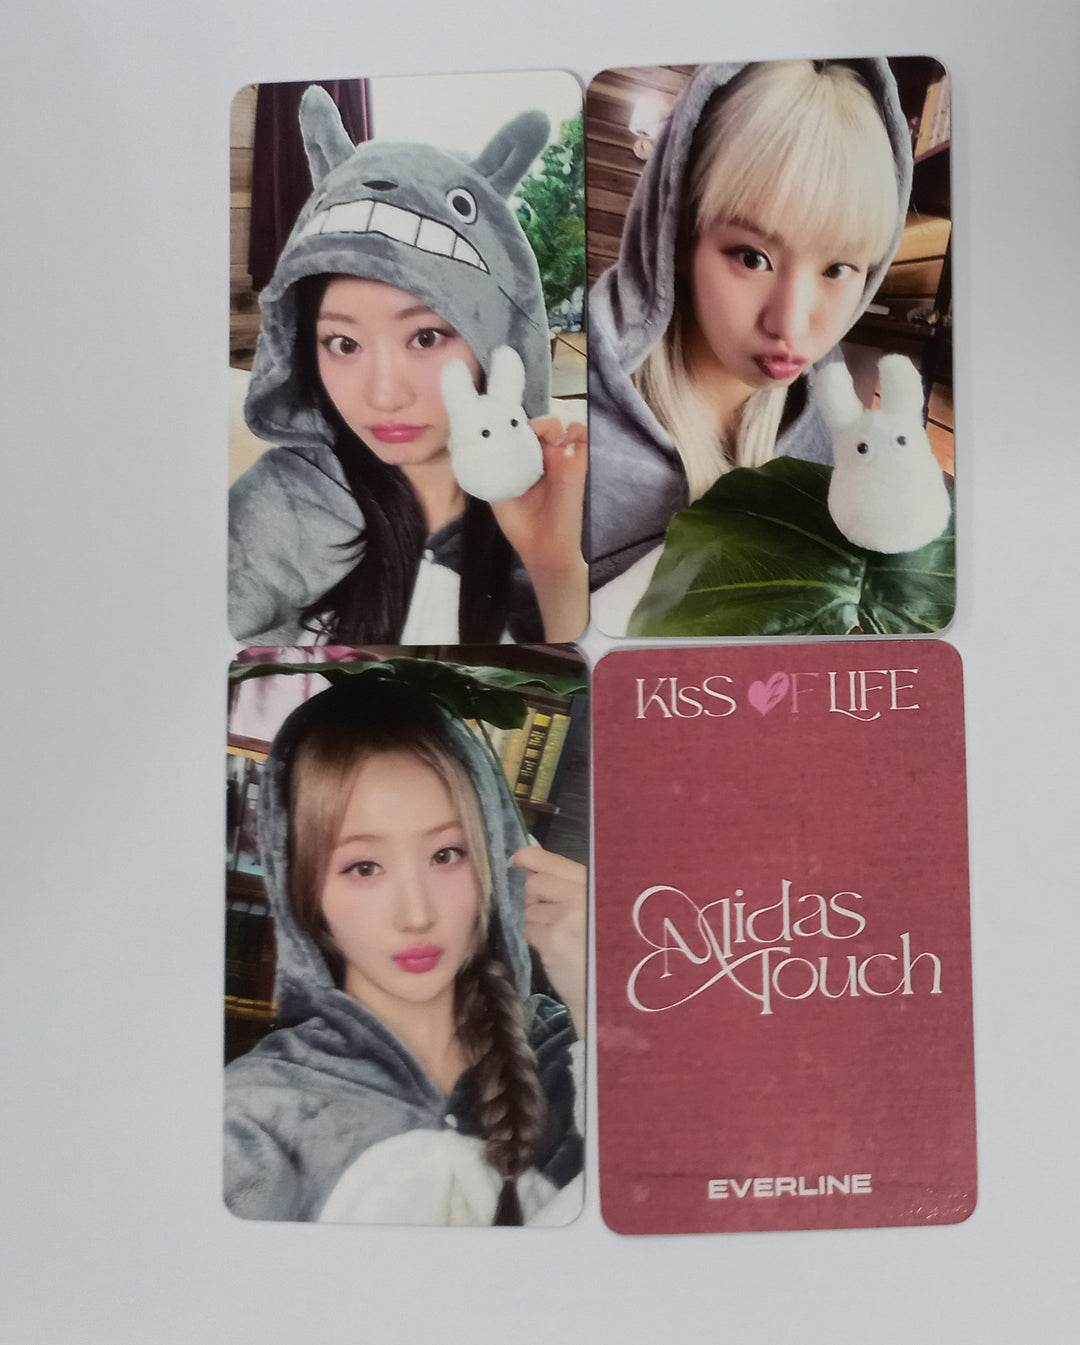 KISS OF LIFE "Midas Touch" - Everline Fansign Event Photocard [24.4.30]